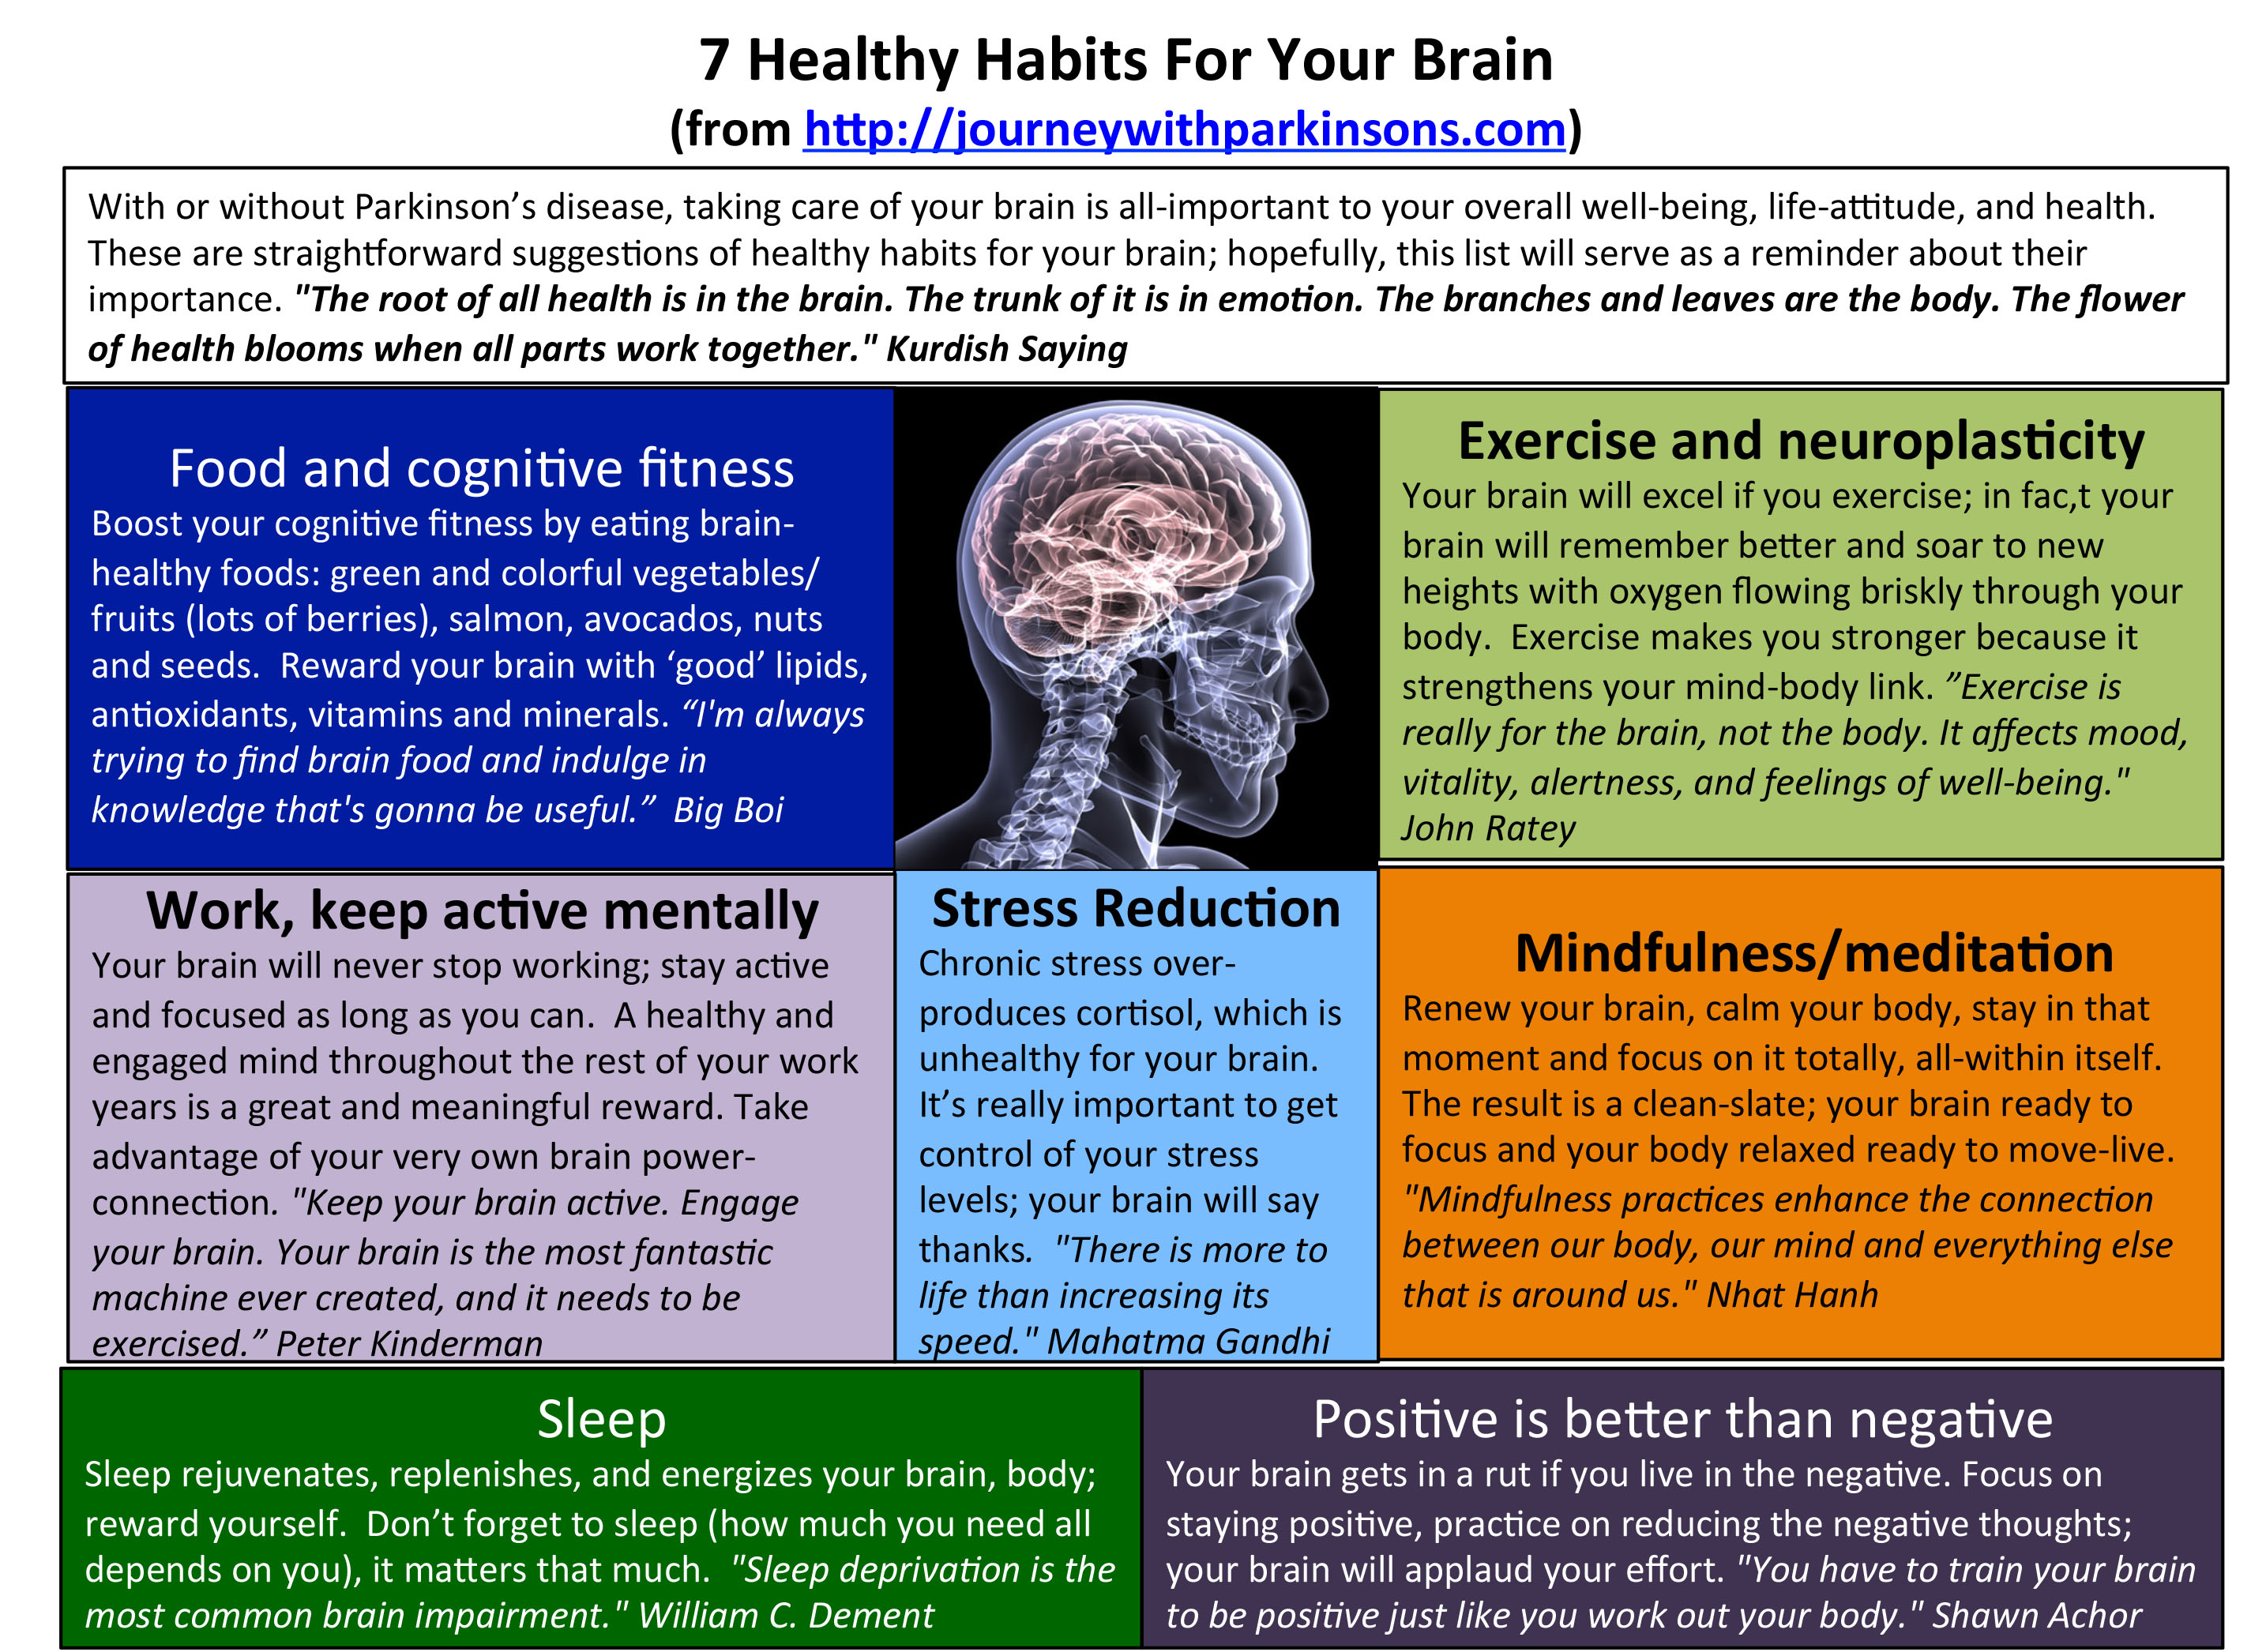 Exercise Your Body to Keep Your Mind Healthy